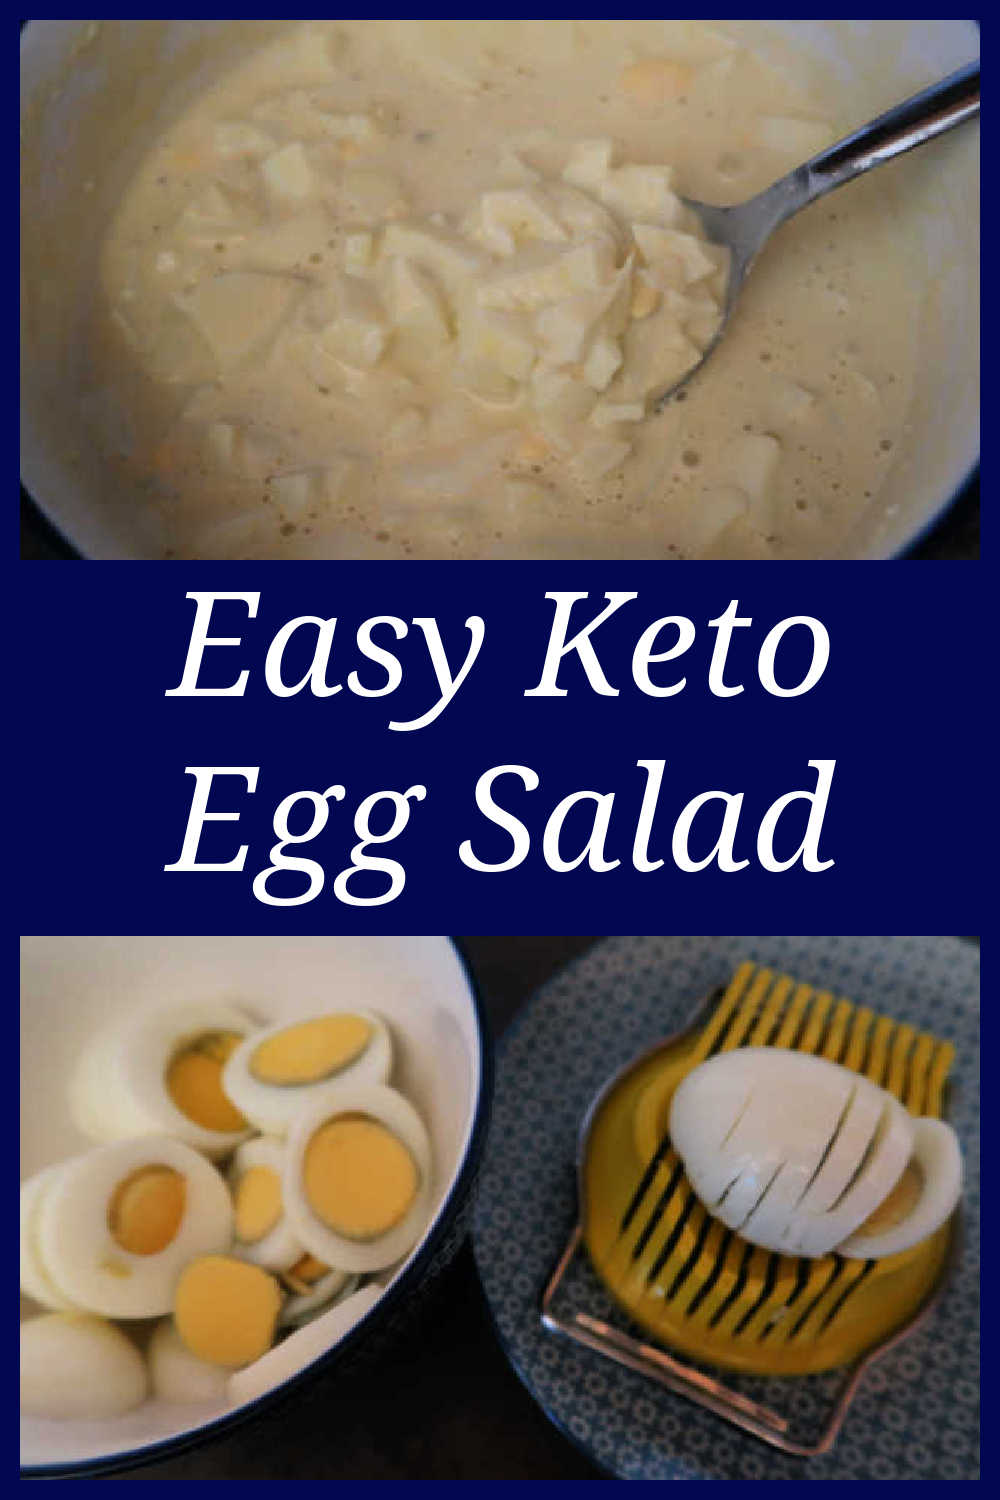 Keto Egg Salad Recipe - How to make the best easy low carb egg salad with only 4 ingredients - with the video tutorial. 